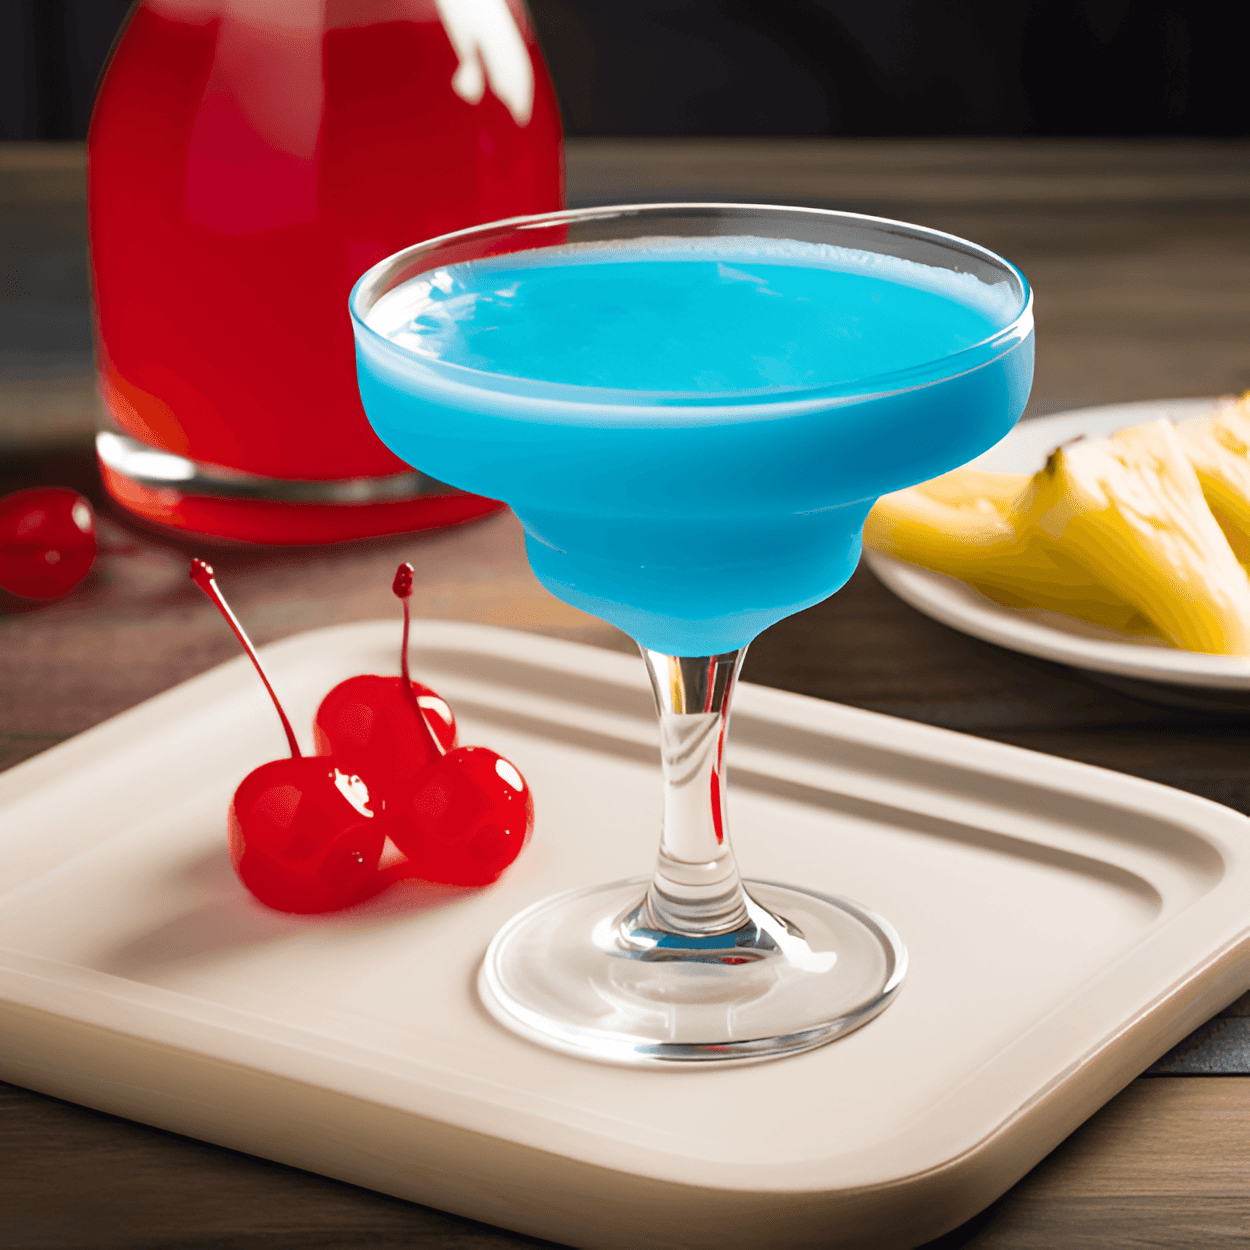 Smurf Cocktail Recipe - The Smurf Cocktail has a sweet and fruity taste, with a hint of citrus. It's light and refreshing, making it perfect for a hot summer day. The blue curacao gives it a slightly tangy flavor, balancing out the sweetness of the pineapple juice and cream of coconut.